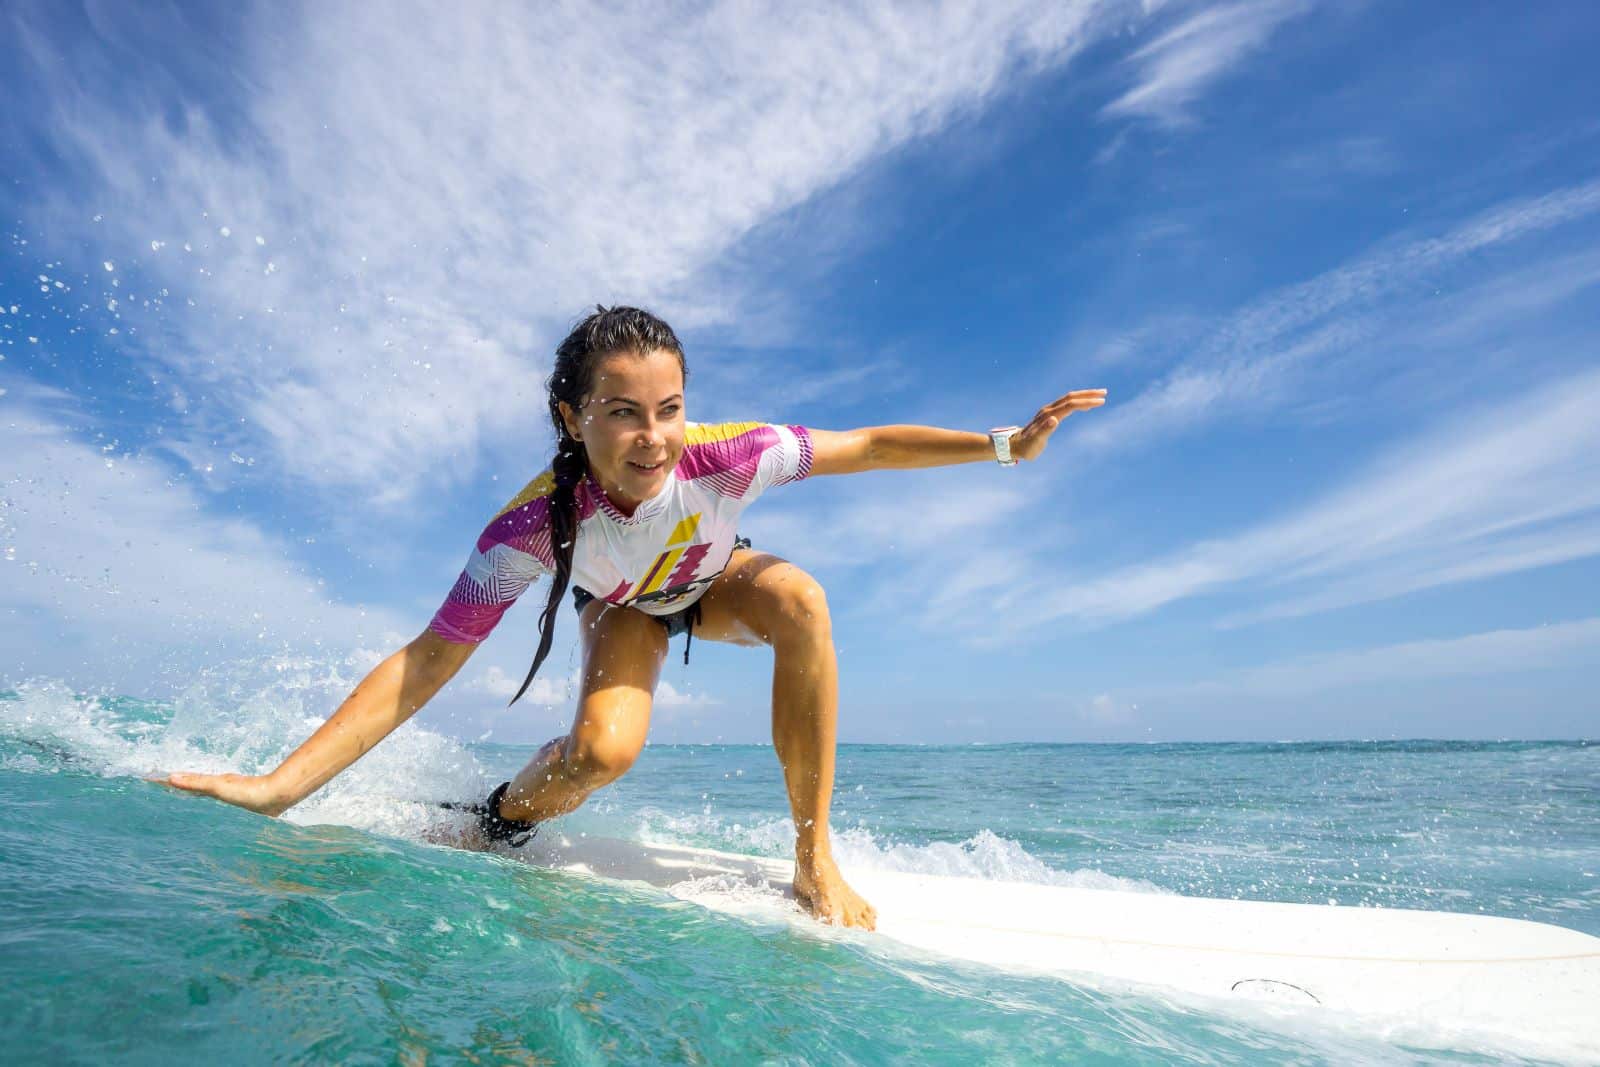 <p class="wp-caption-text">Image Credit: Shutterstock / ohrim</p>  <p>Want to surf without spectators? Terramar Street is your go-to. It’s less known but has some of the best waves.</p>